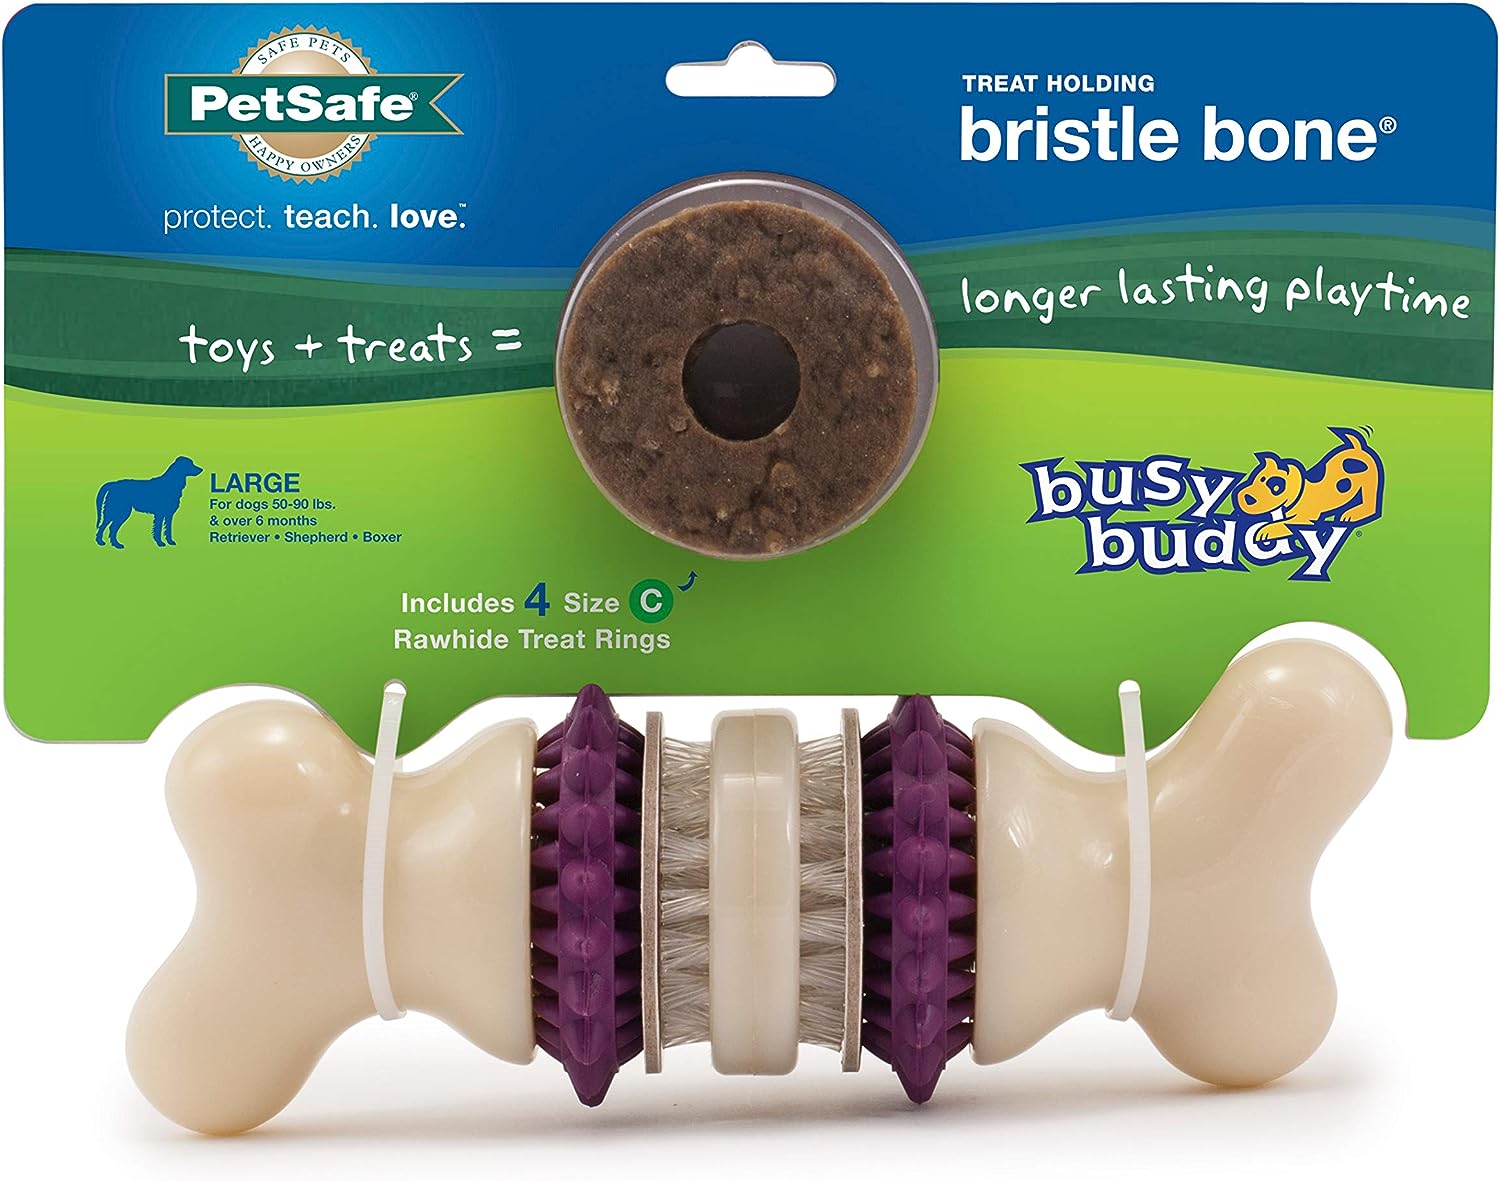 PetSafe Busy Buddy Bristle Bone - Treat-Holding Toy for Dogs - Treat Rings Included - Treats Thoroughly Mixed During Bake to Prevent Choking - Rigorously Tested Ingredients - Purple, Large